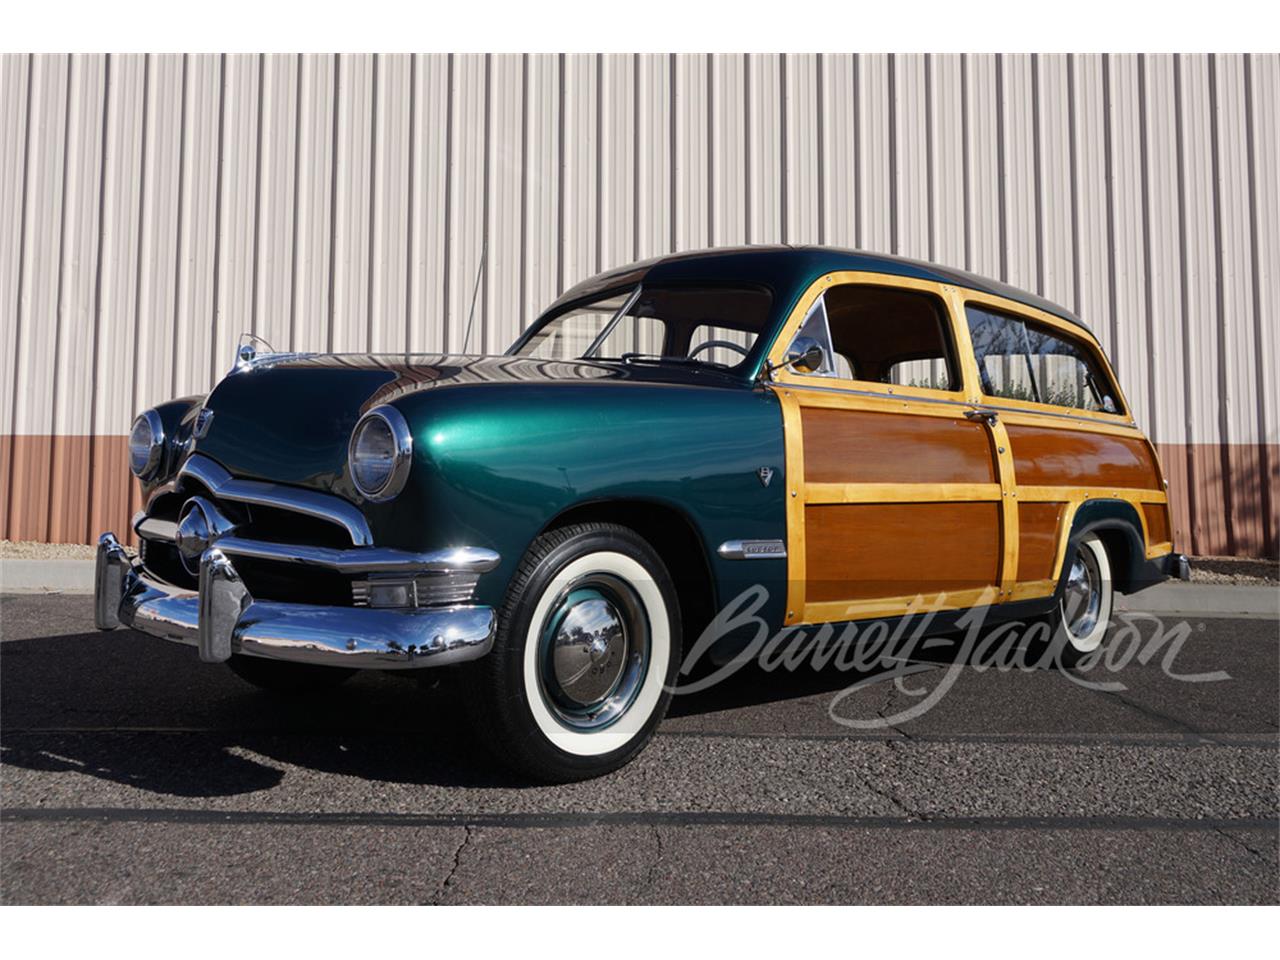 For Sale at Auction: 1950 Ford Custom in Scottsdale, Arizona for sale in Scottsdale, AZ